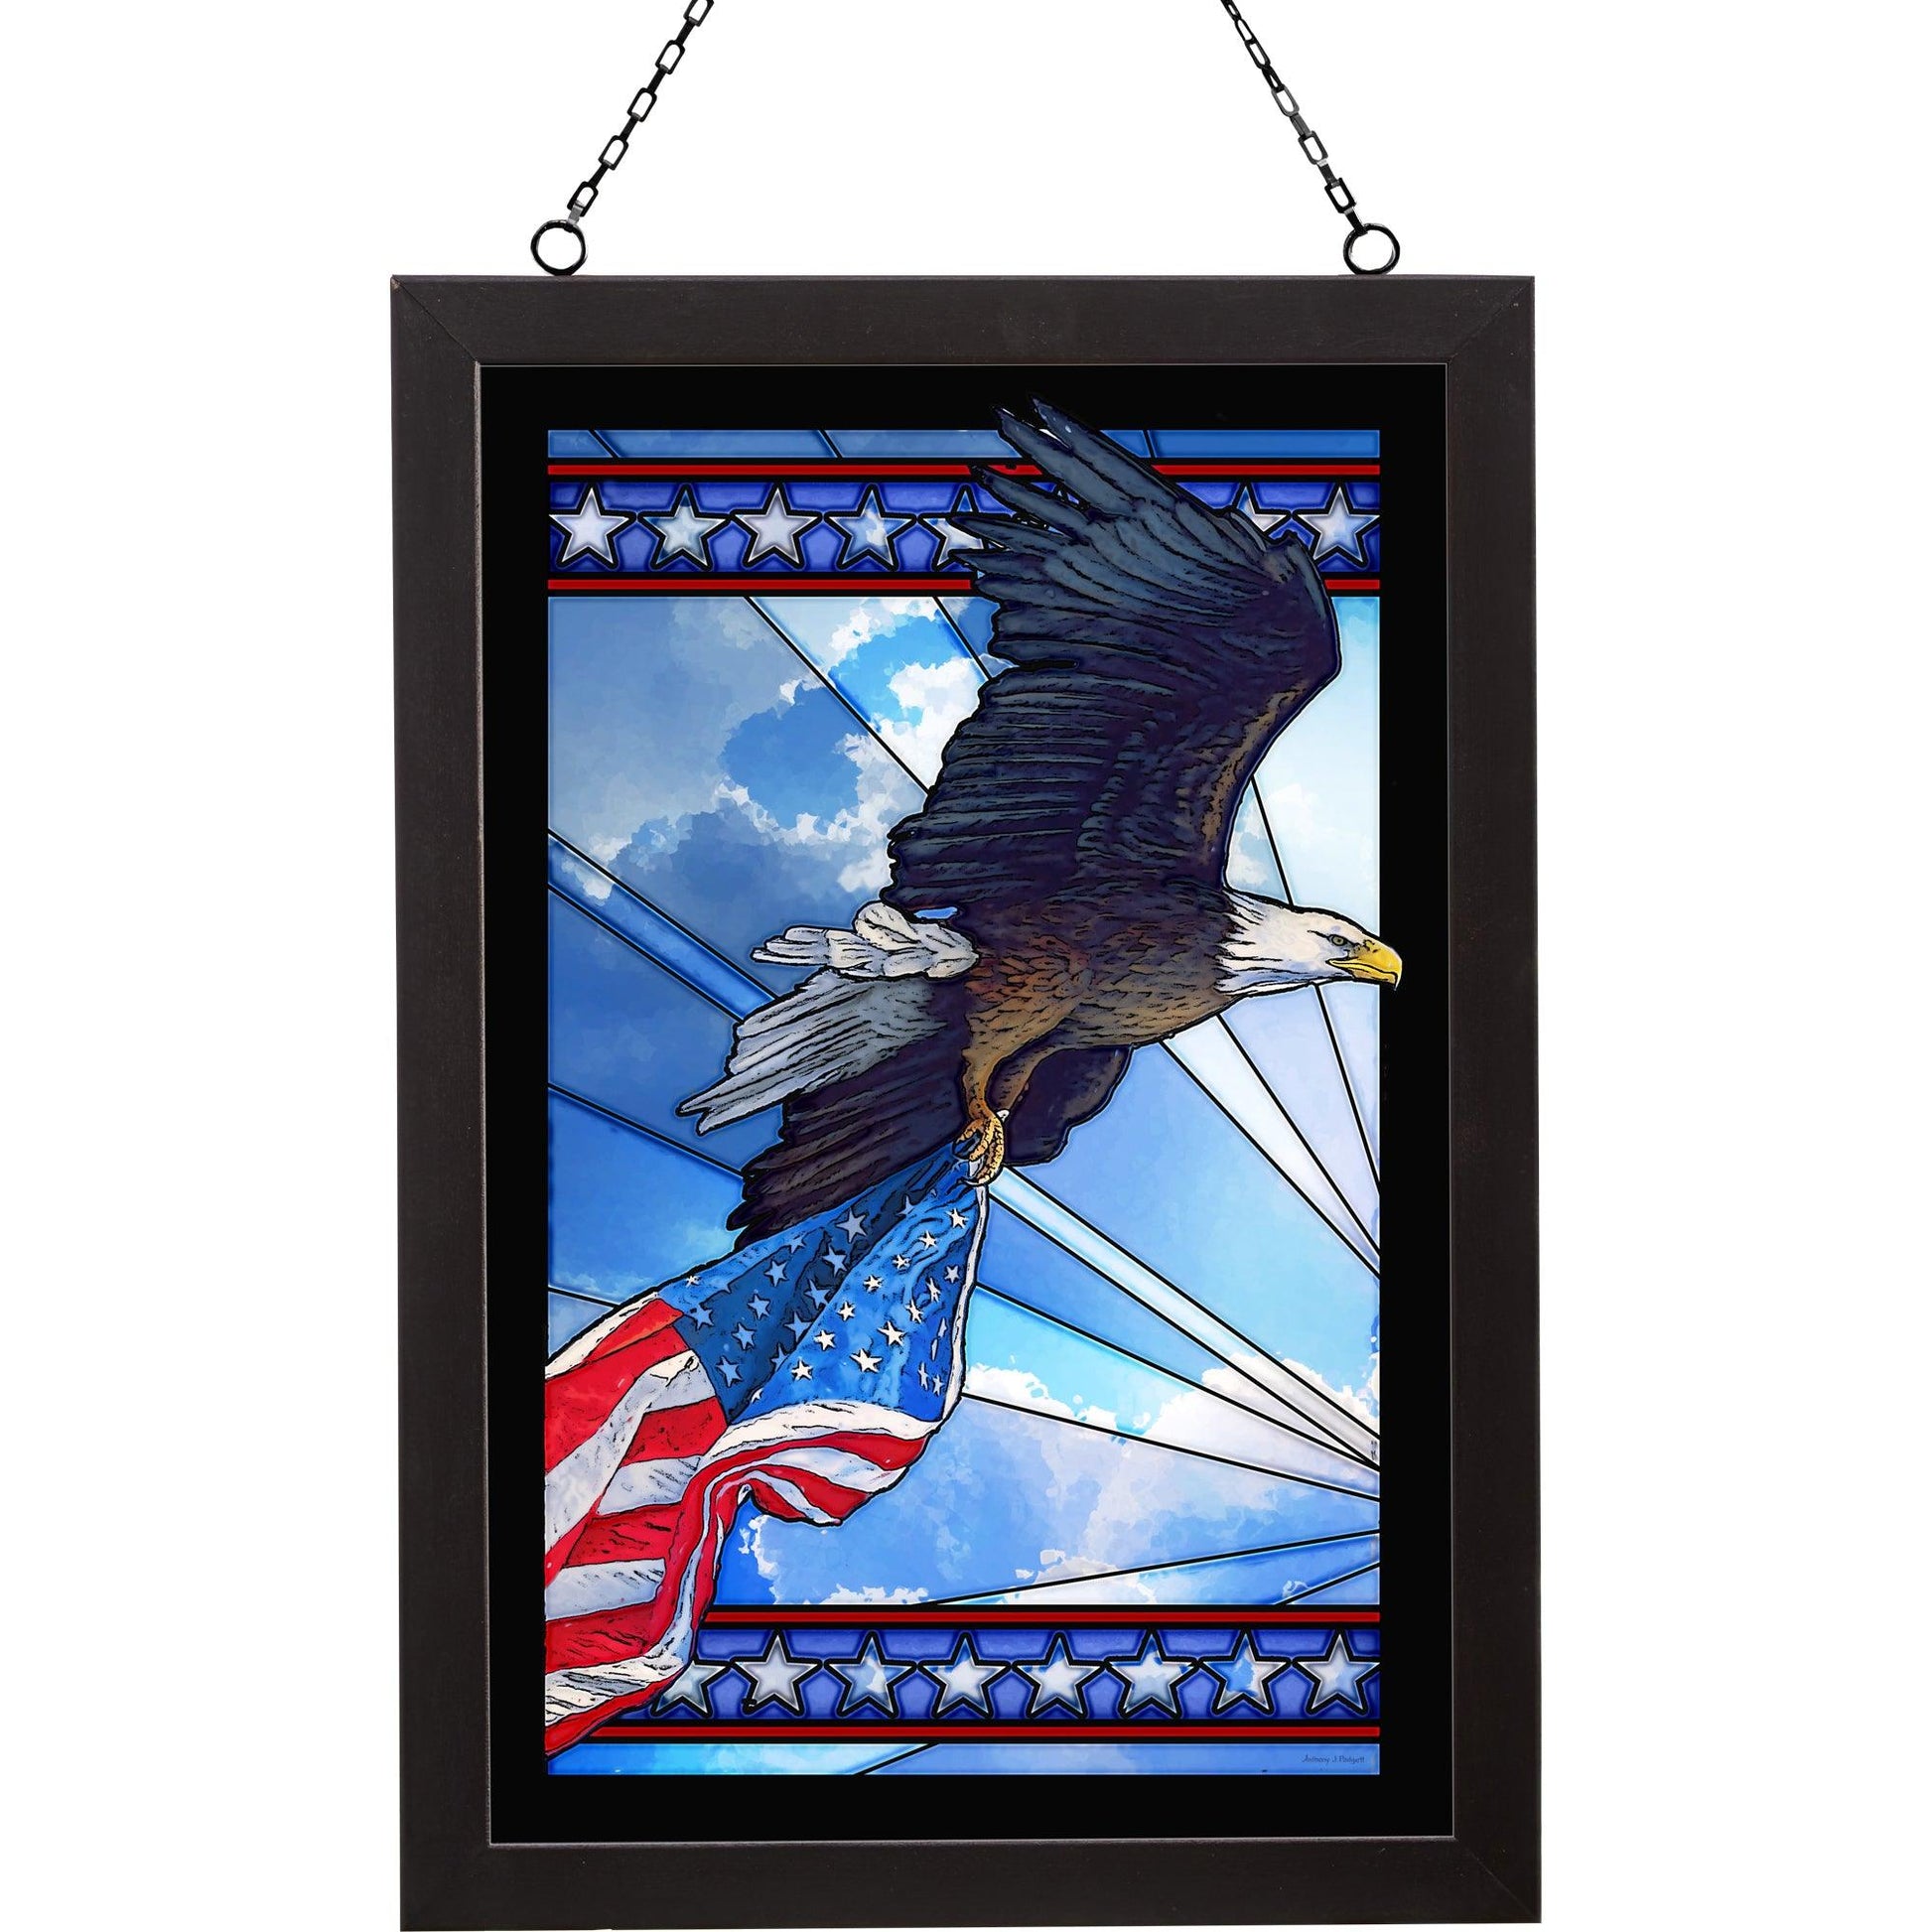 Our Glory - Bald Eagle Stained Glass Art - Wild Wings